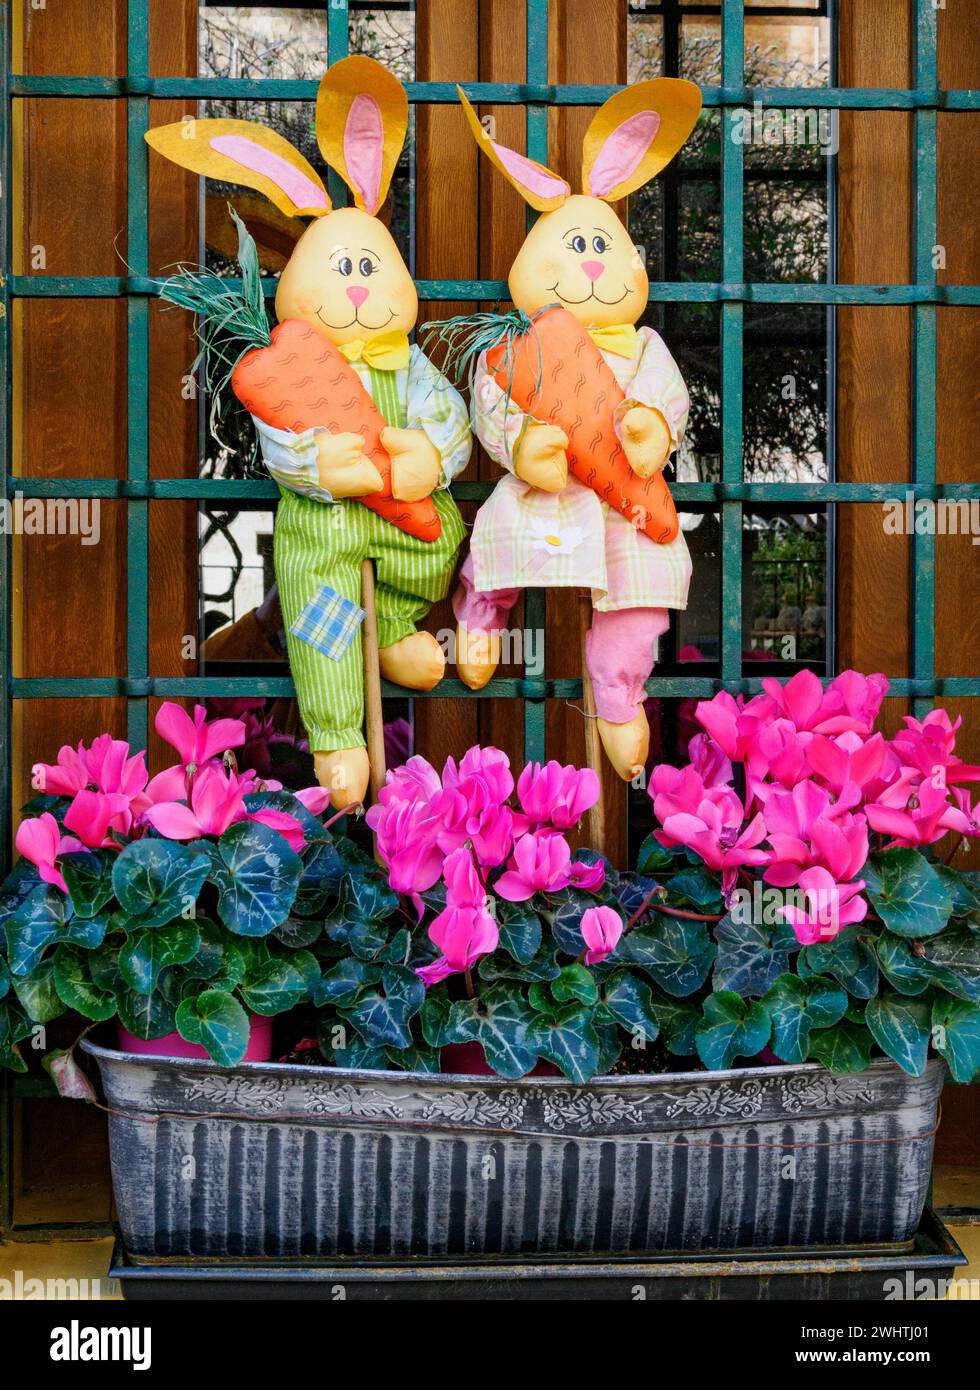 Window of a house in Majorca Spain decorated with Easter bunnies and a window box filled with pink cyclamen flowers Stock Photo